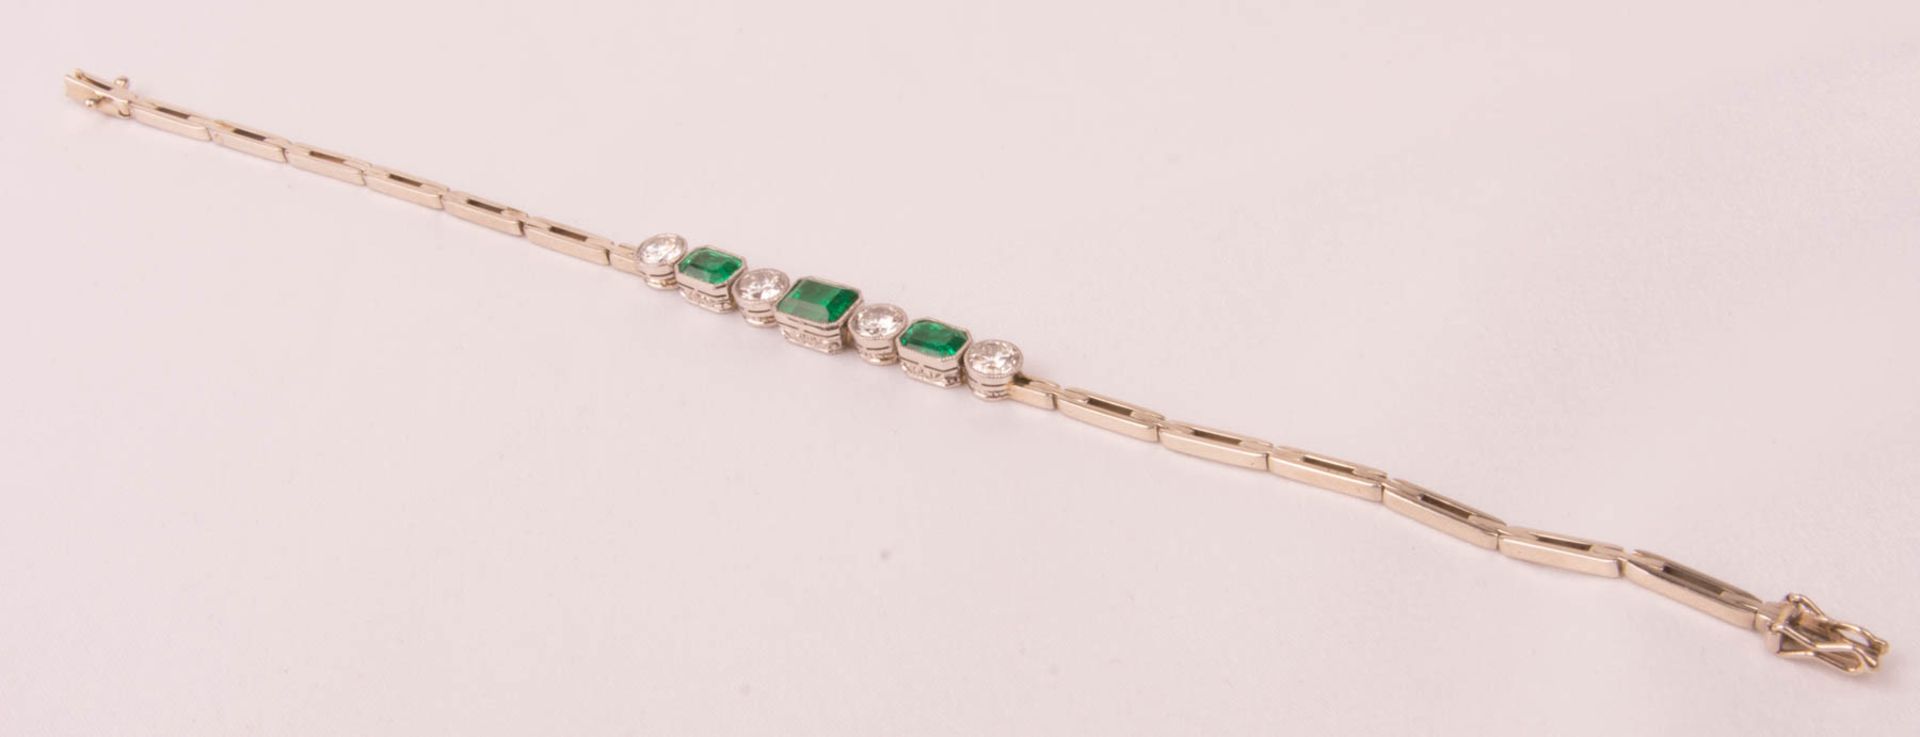 Bracelet with matching ring, emeralds and diamonds, 585/750 white gold. - Image 3 of 7